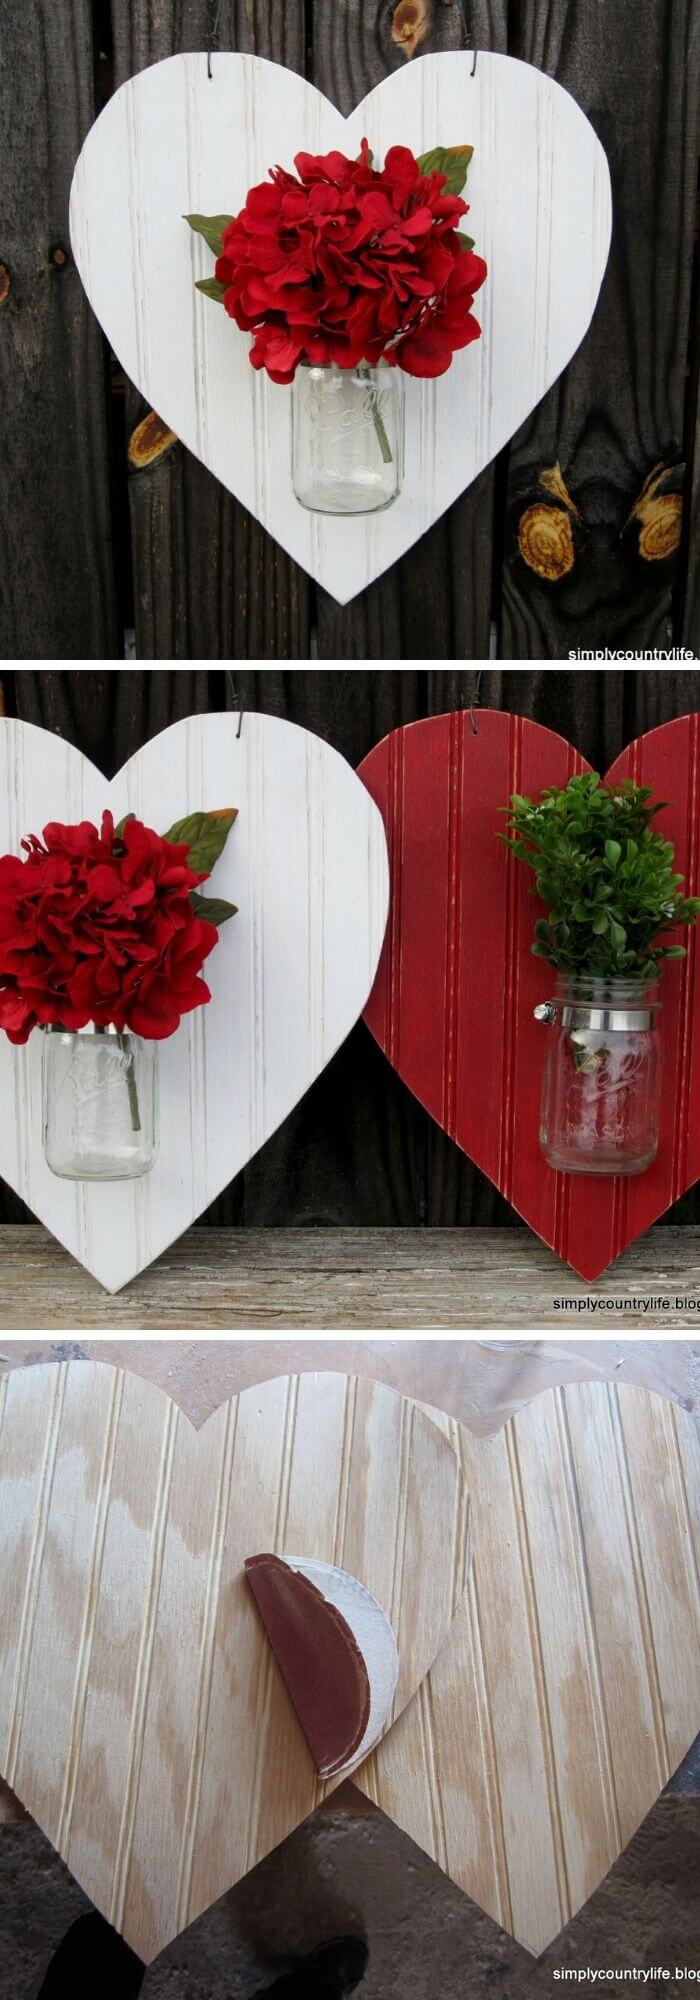 The mounted Mason jar vases - Rustic Wood Heart Projects